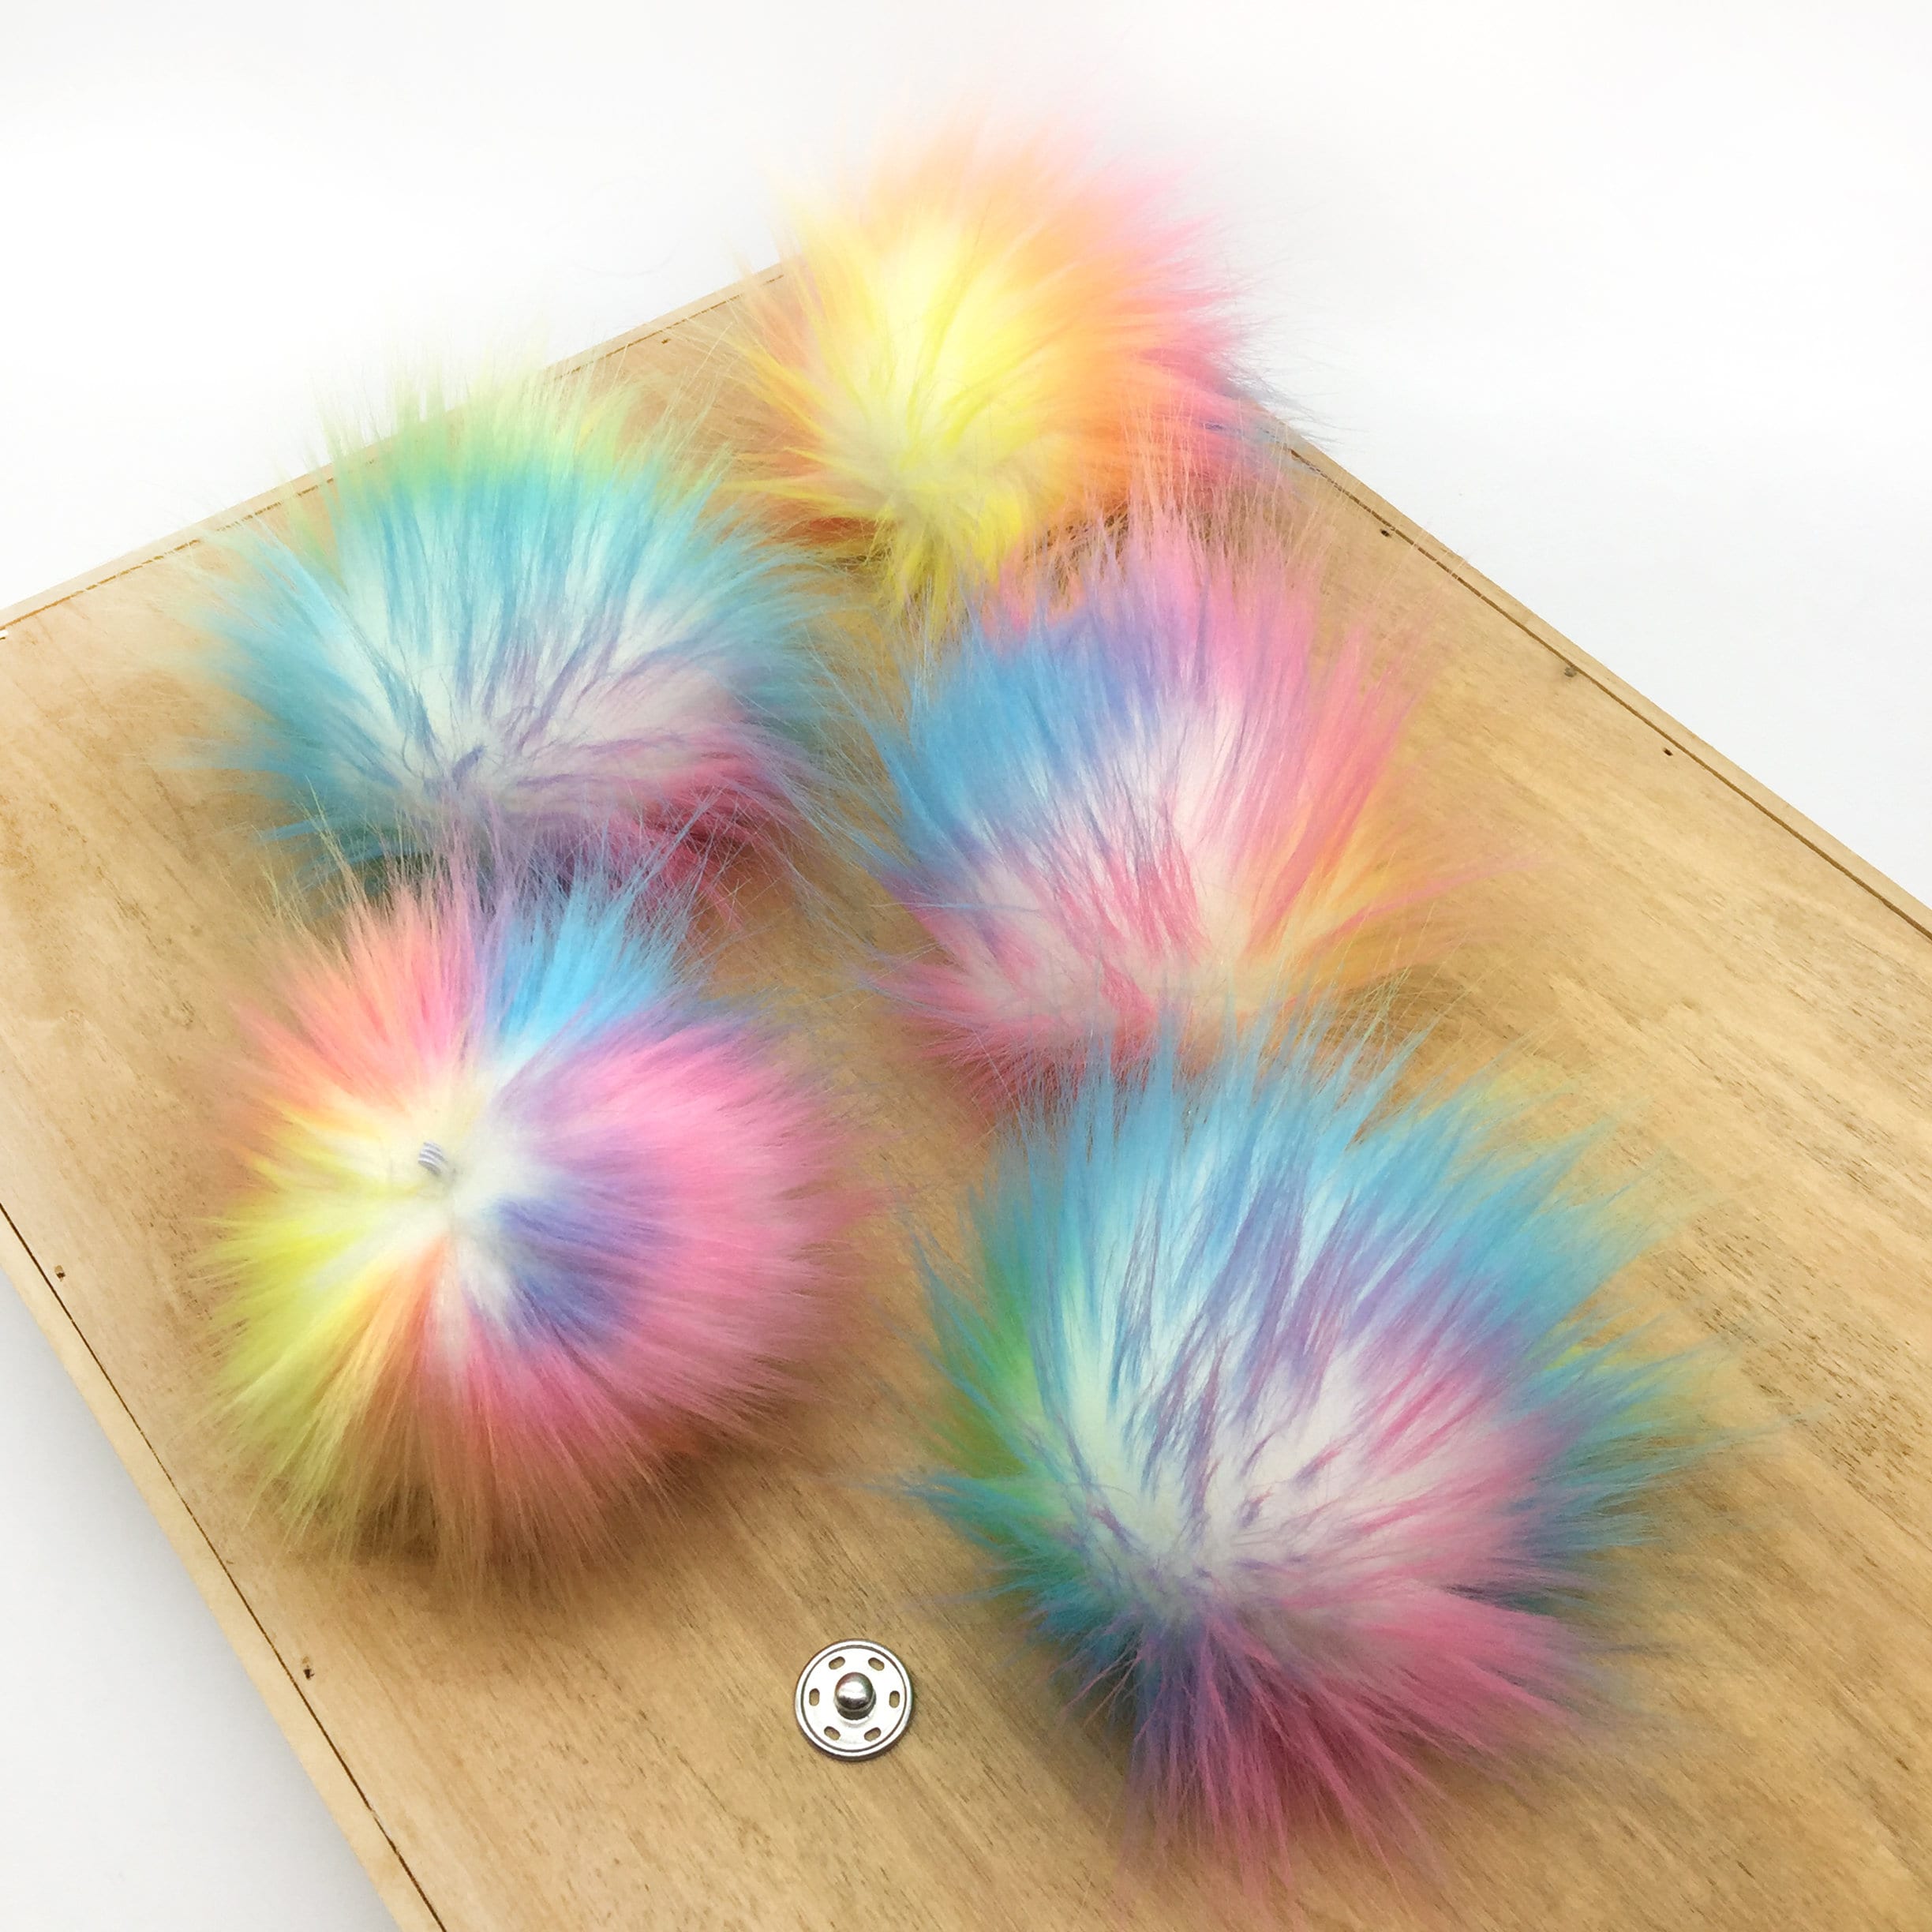 Fox Fur Pompoms for Hats DIY Fluffy Real Fur Pom Pom Balls Accessories with  Button Natural